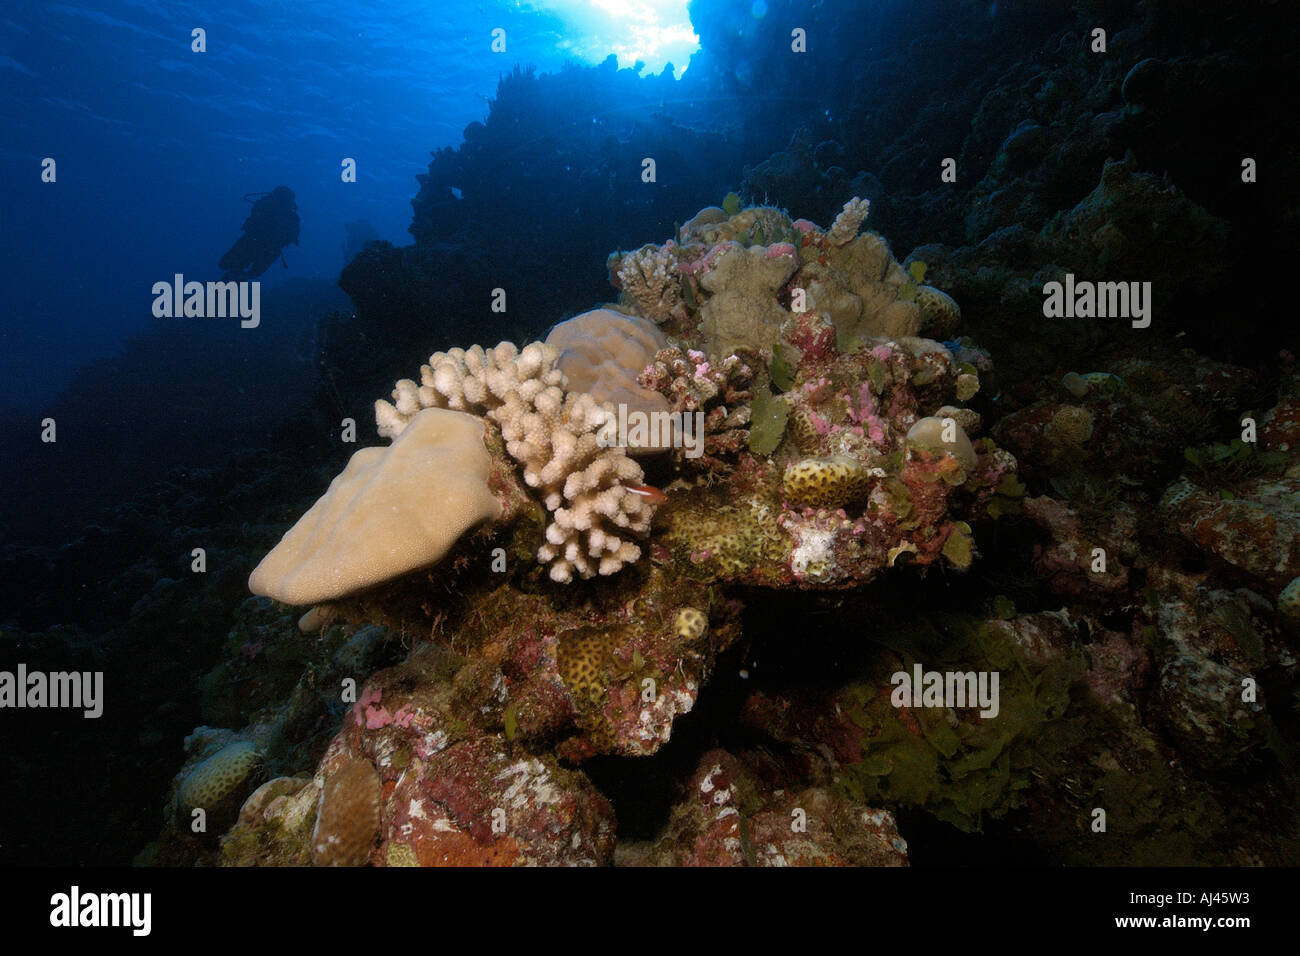 Diverse coral reef head and diver silhouette Ailuk atoll Marshall Islands Pacific Stock Photo